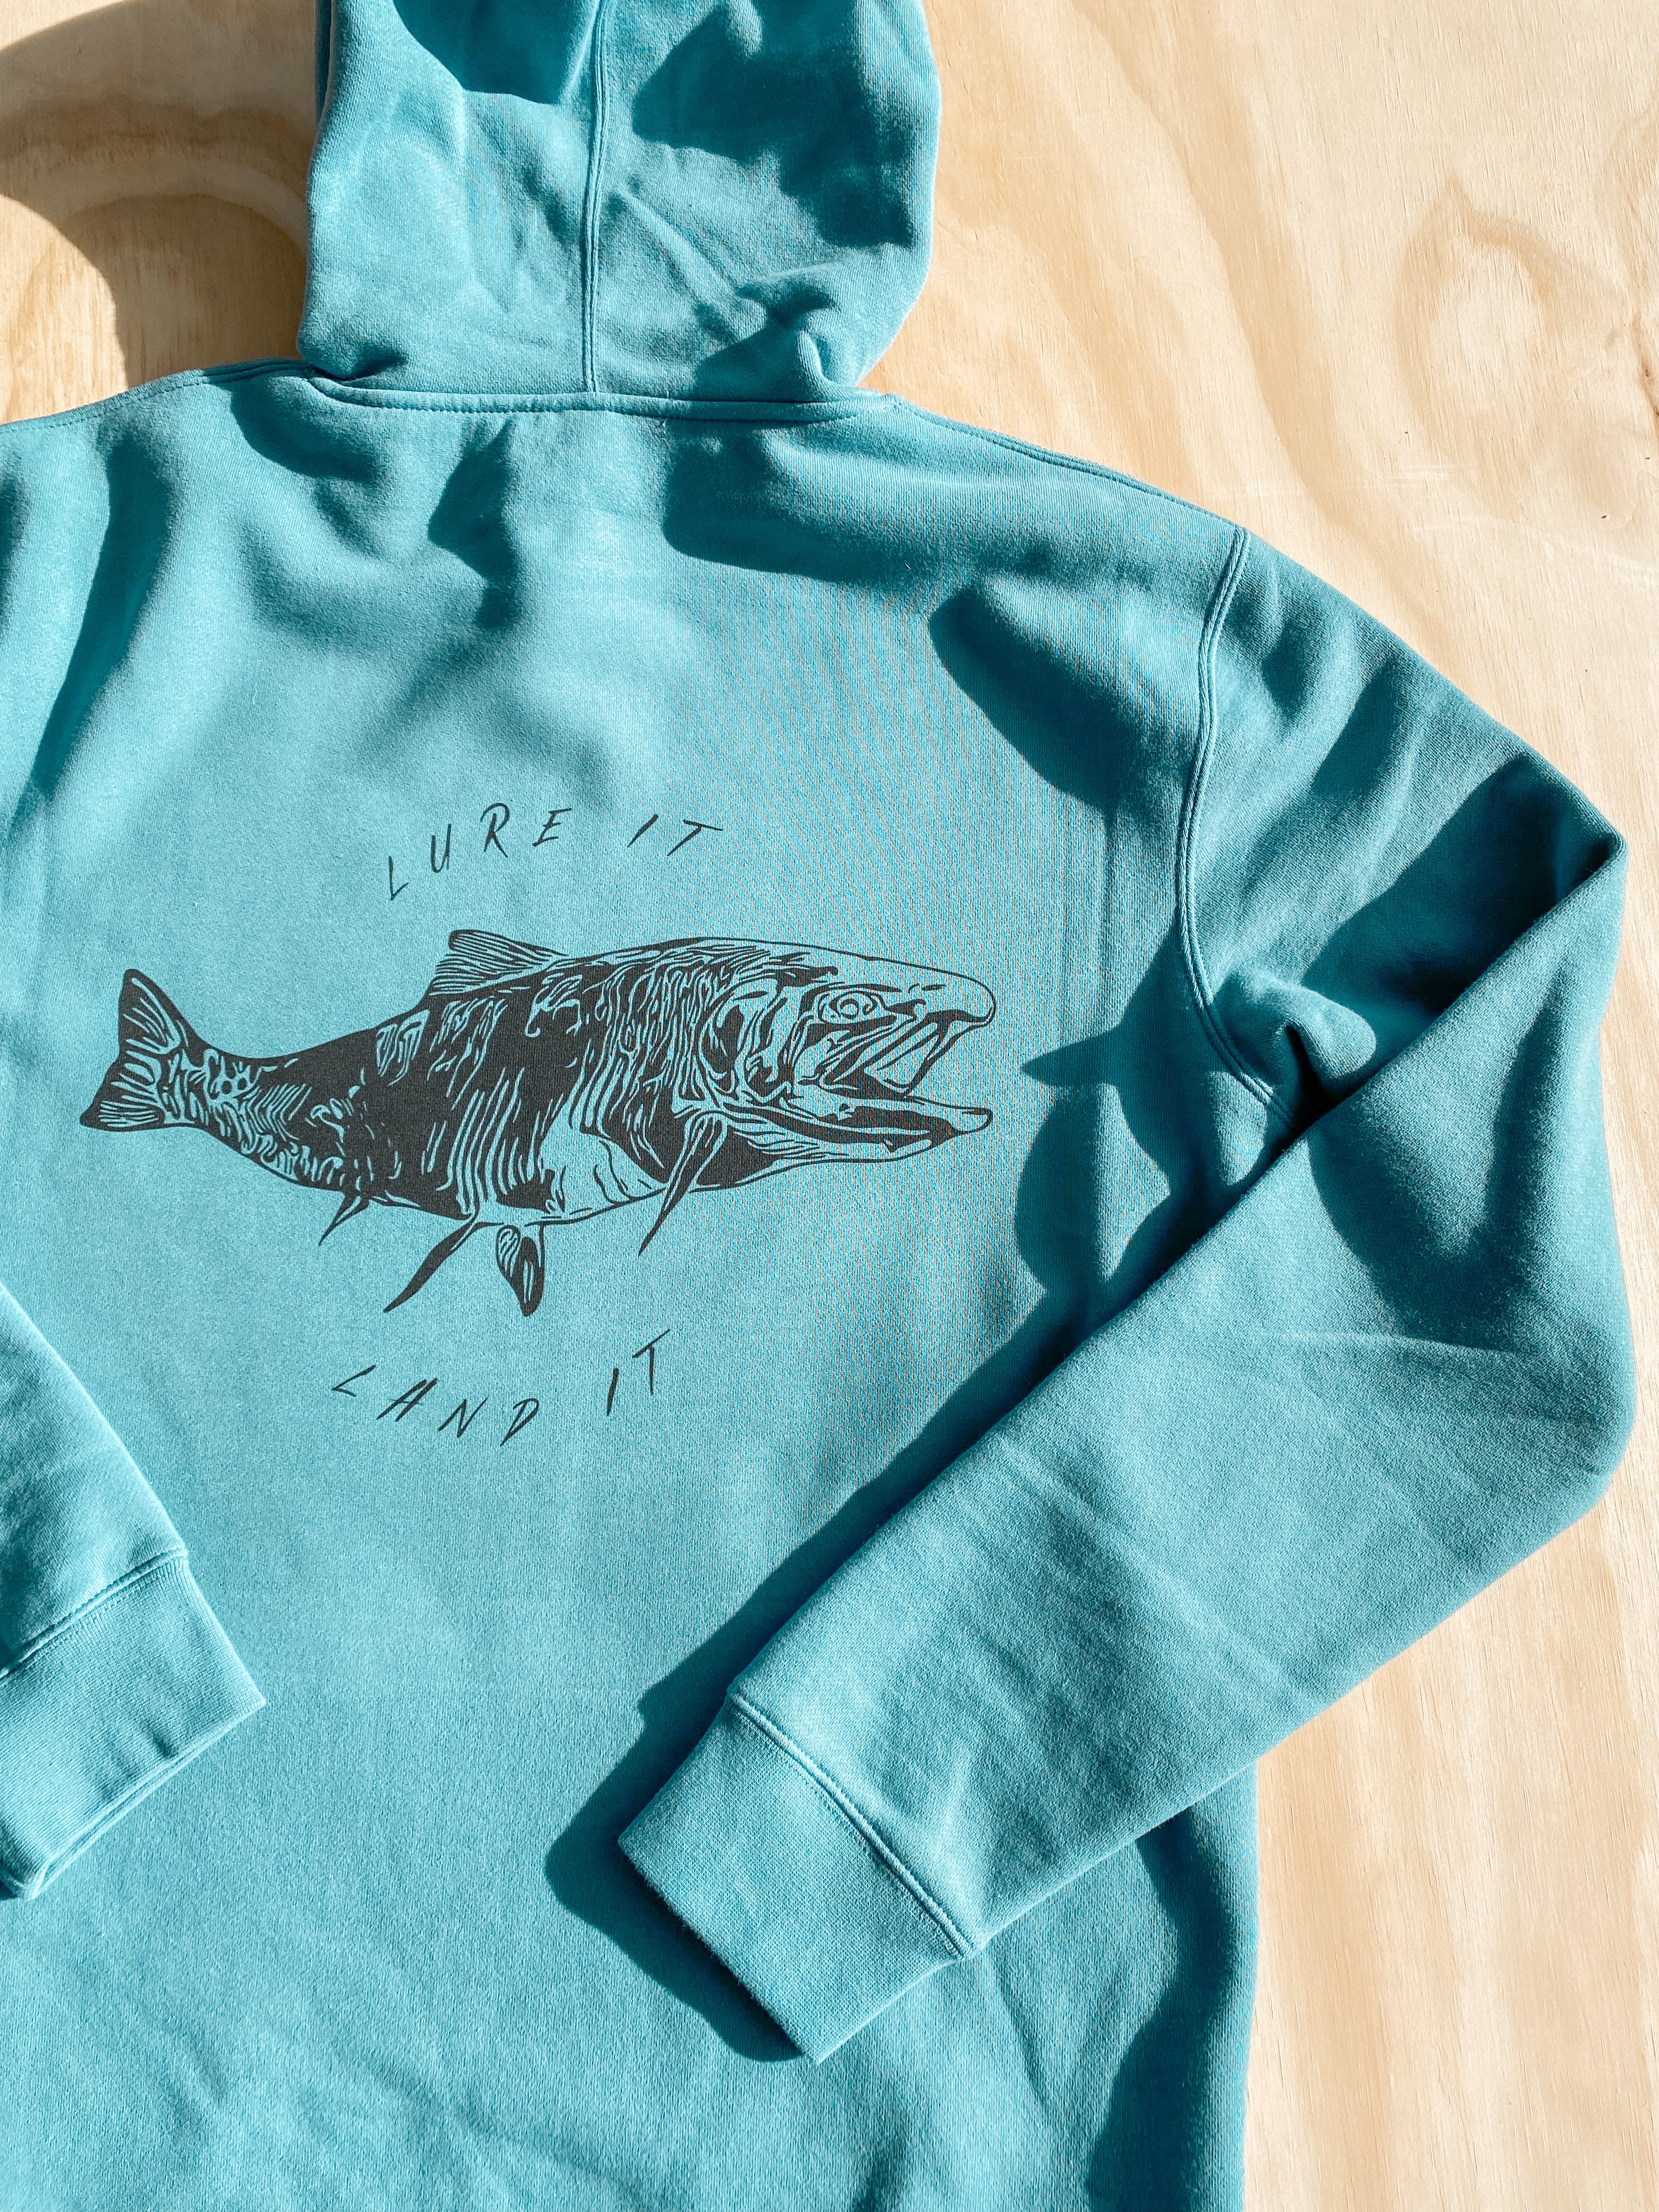 Lure it Land it Trout hoodie – Shoot Catch Create